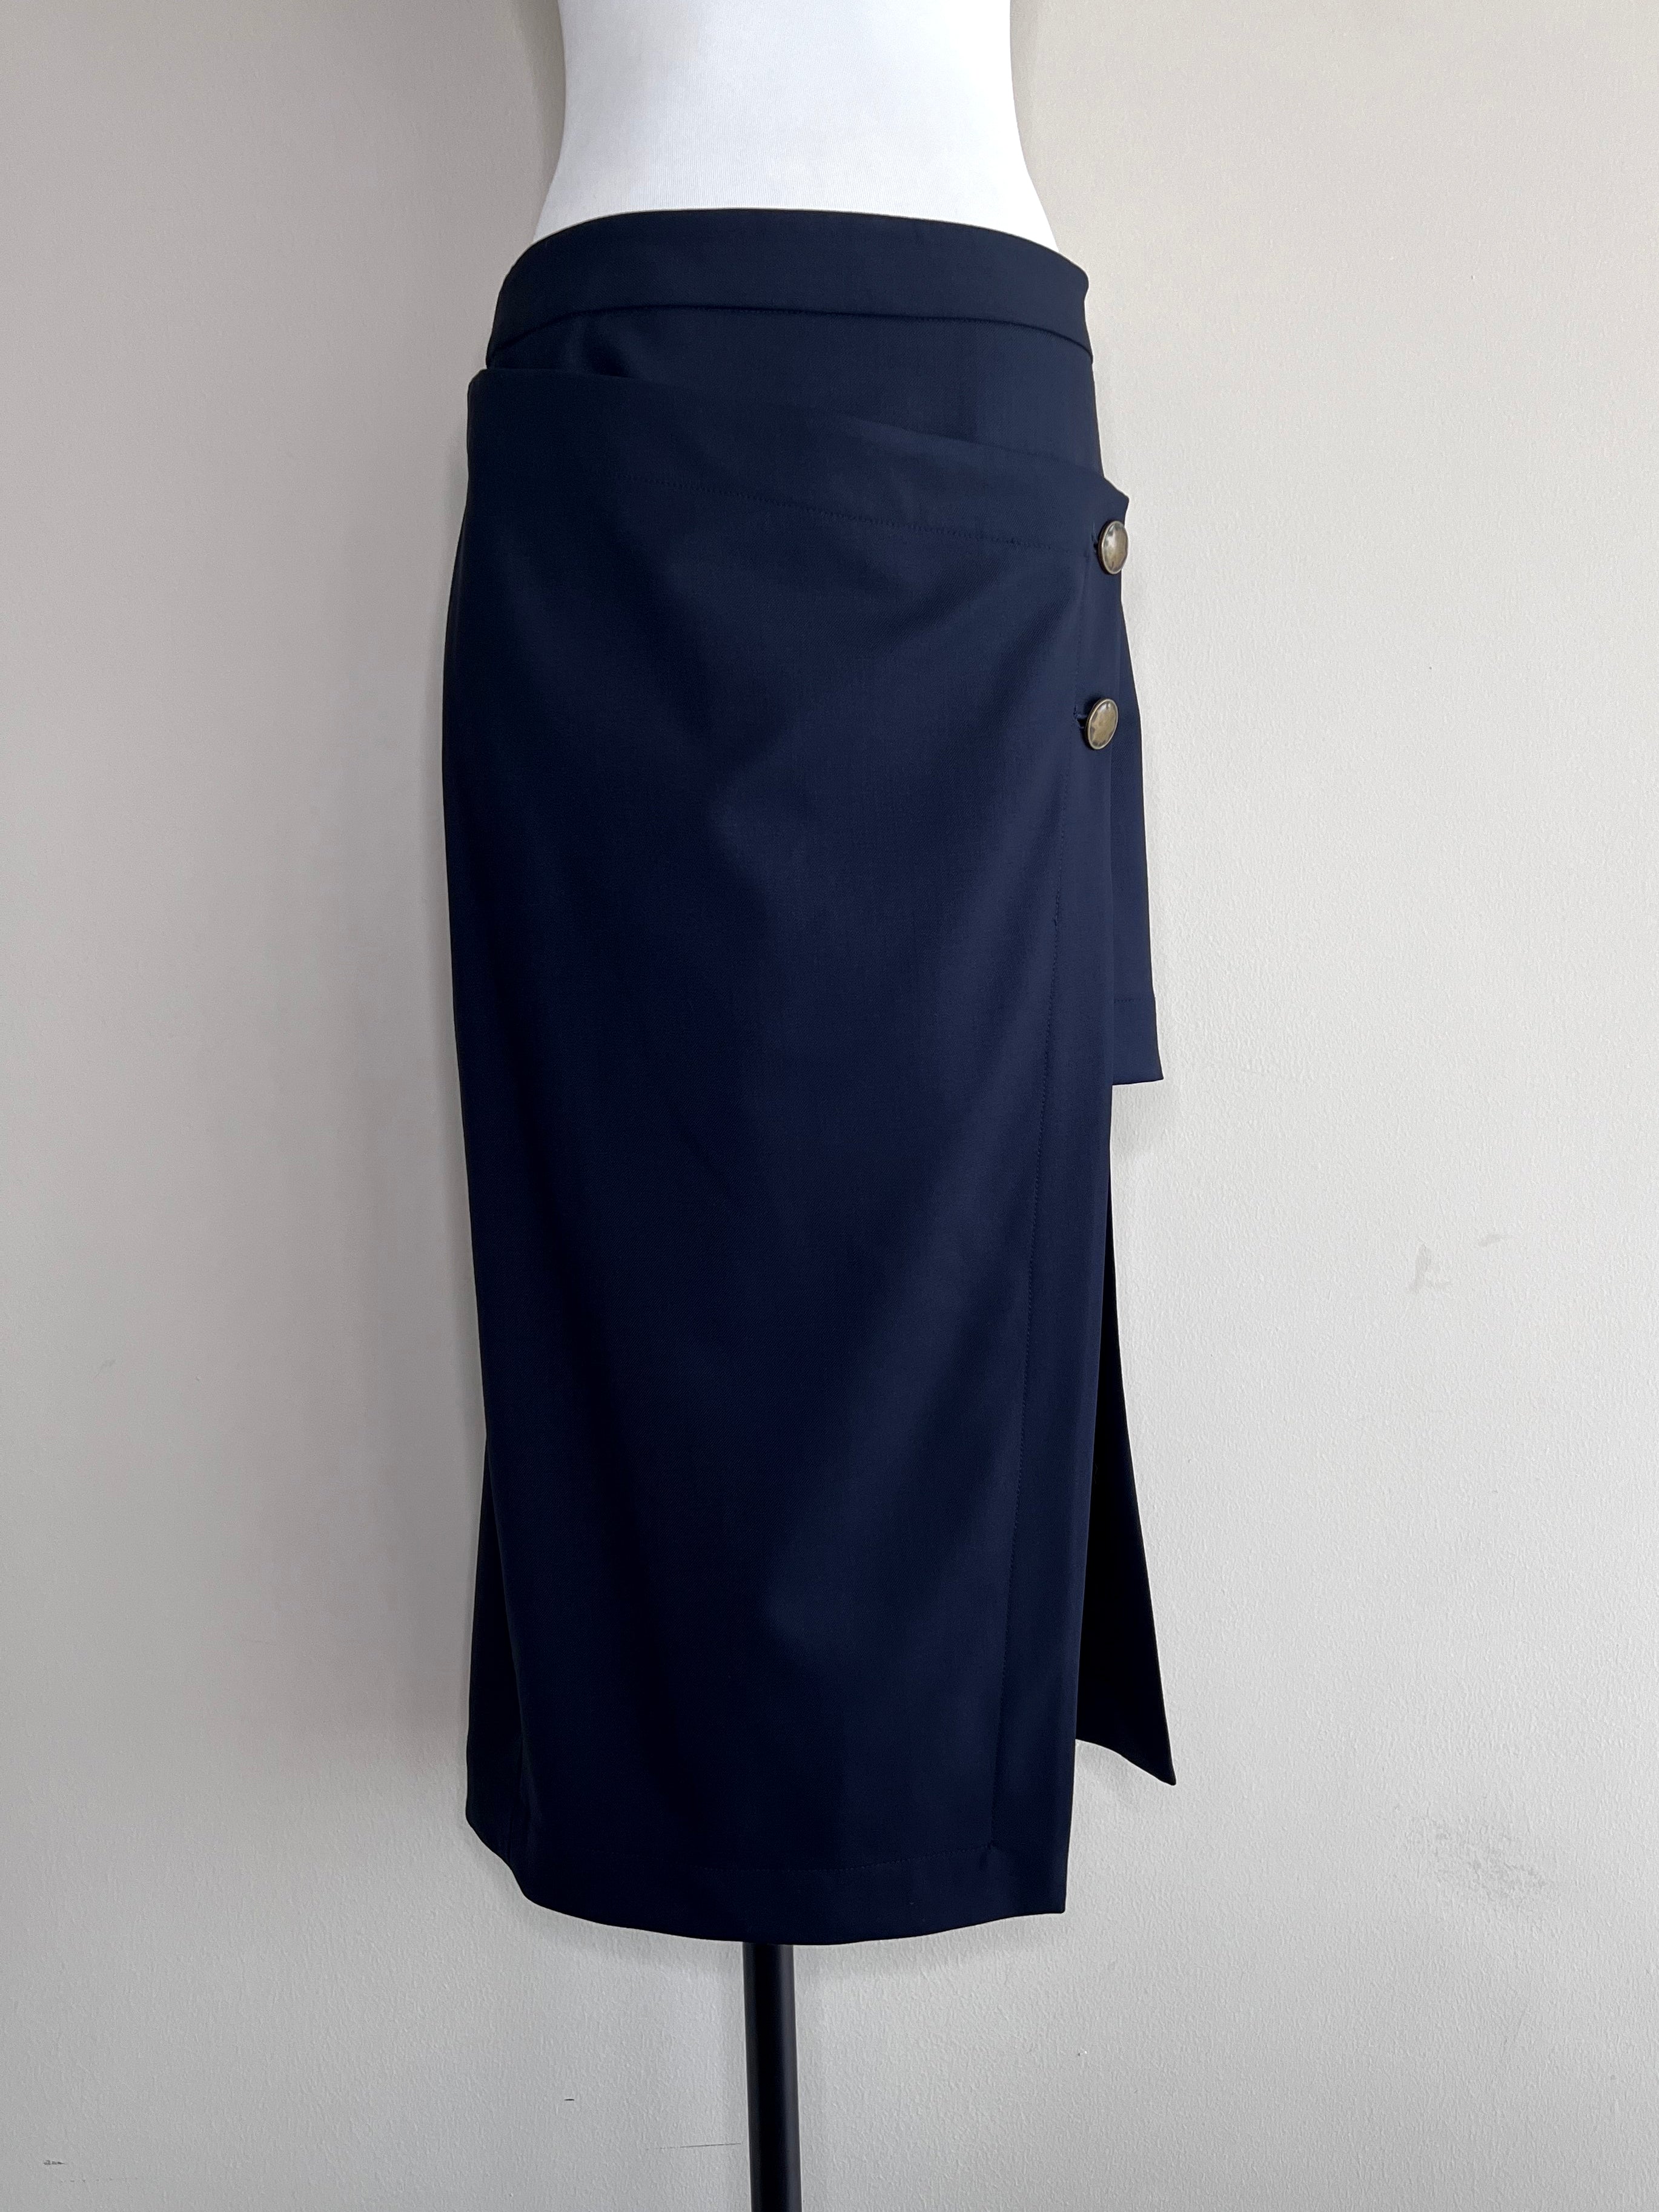 Navy Blue folded skirt with gold antique side buttons - MONSE